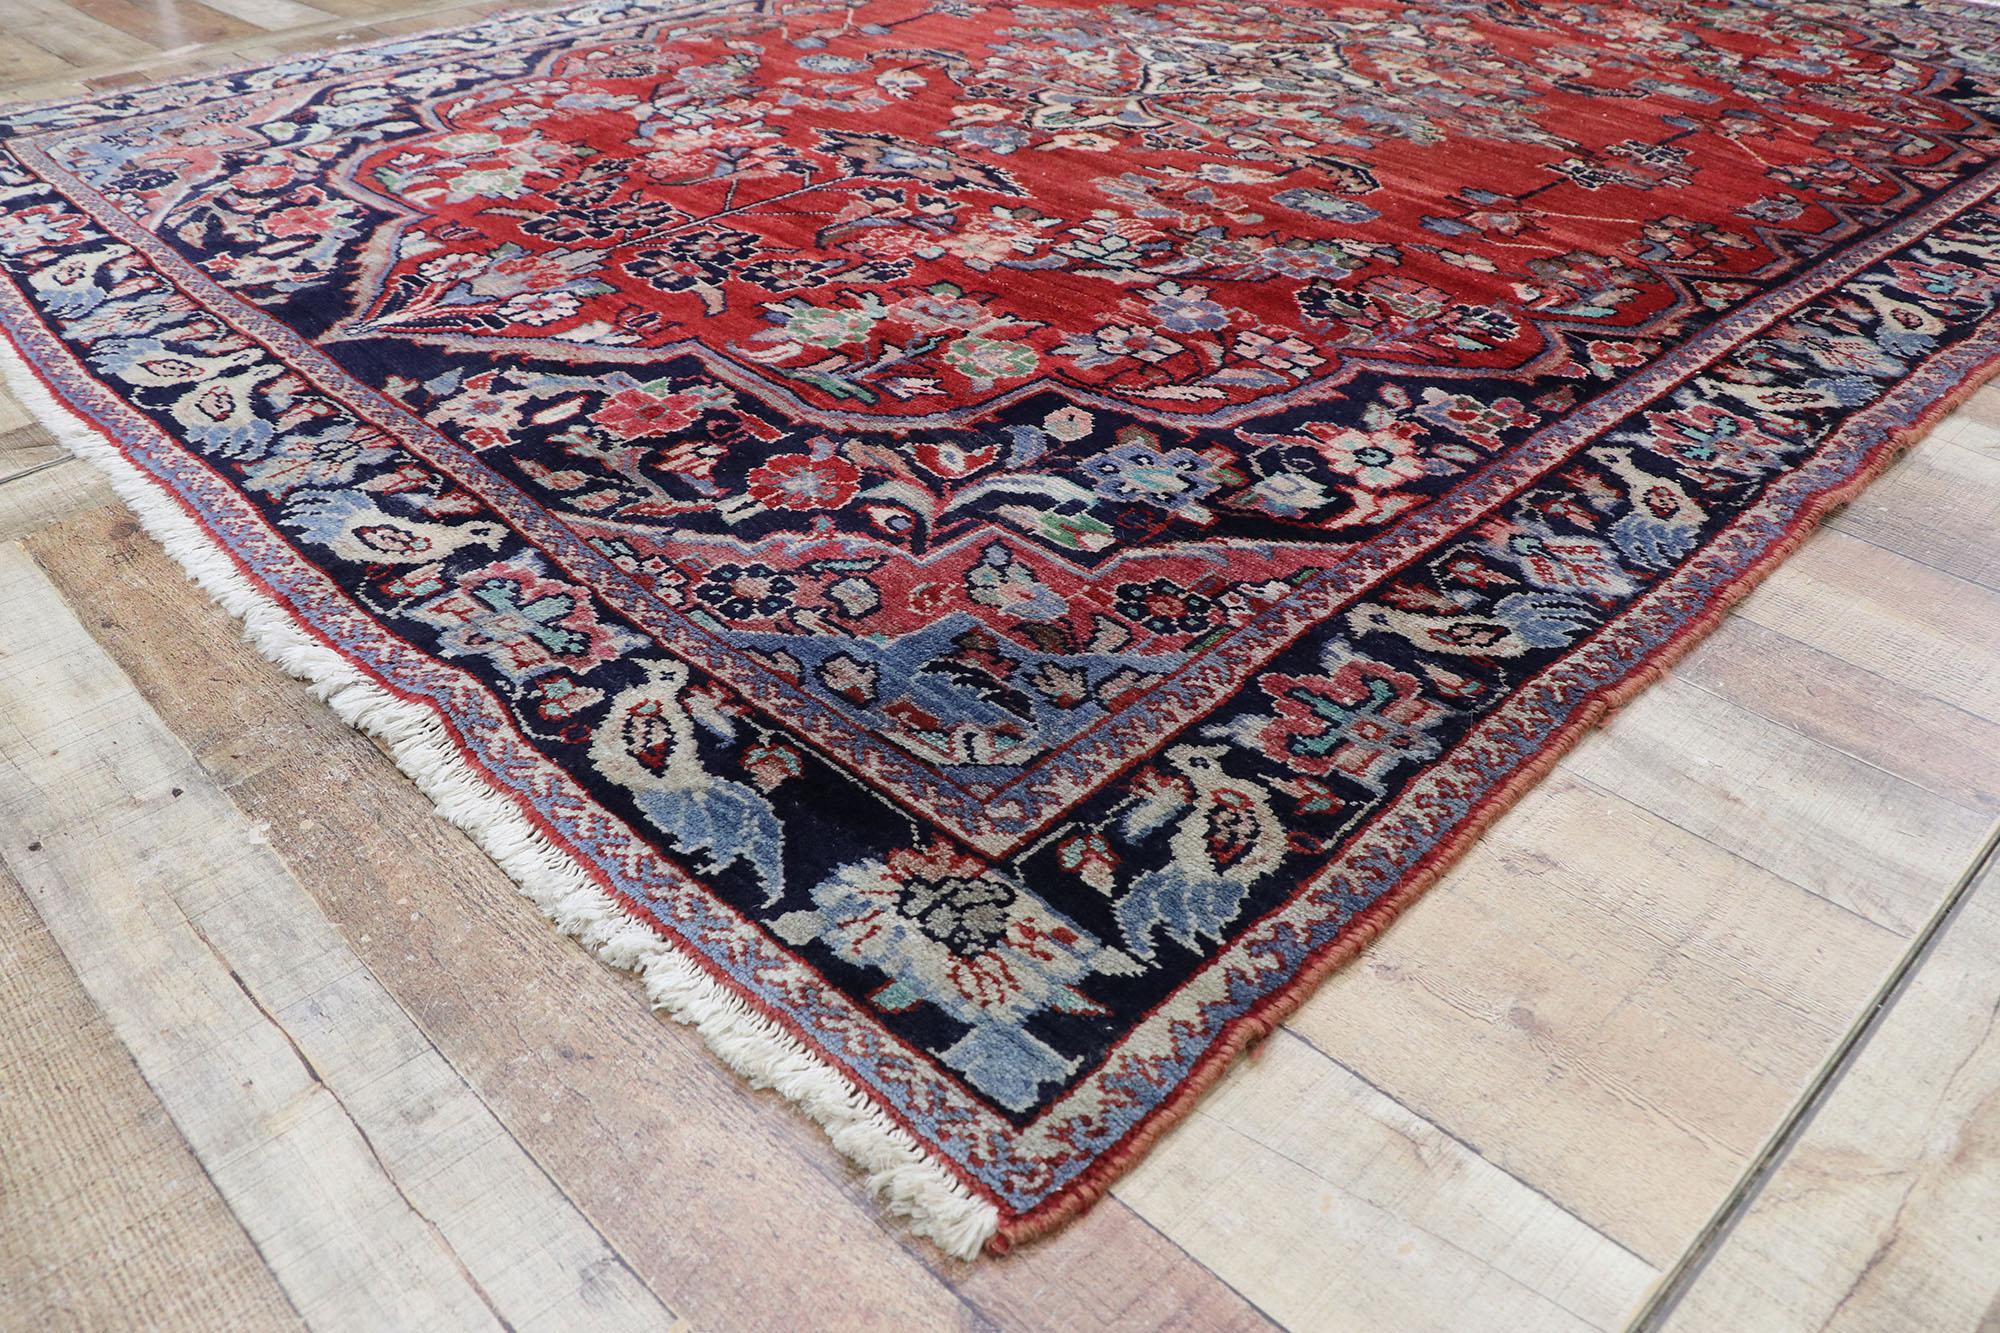 Vintage Persian Mahal Rug with Old World Victorian Style In Good Condition For Sale In Dallas, TX